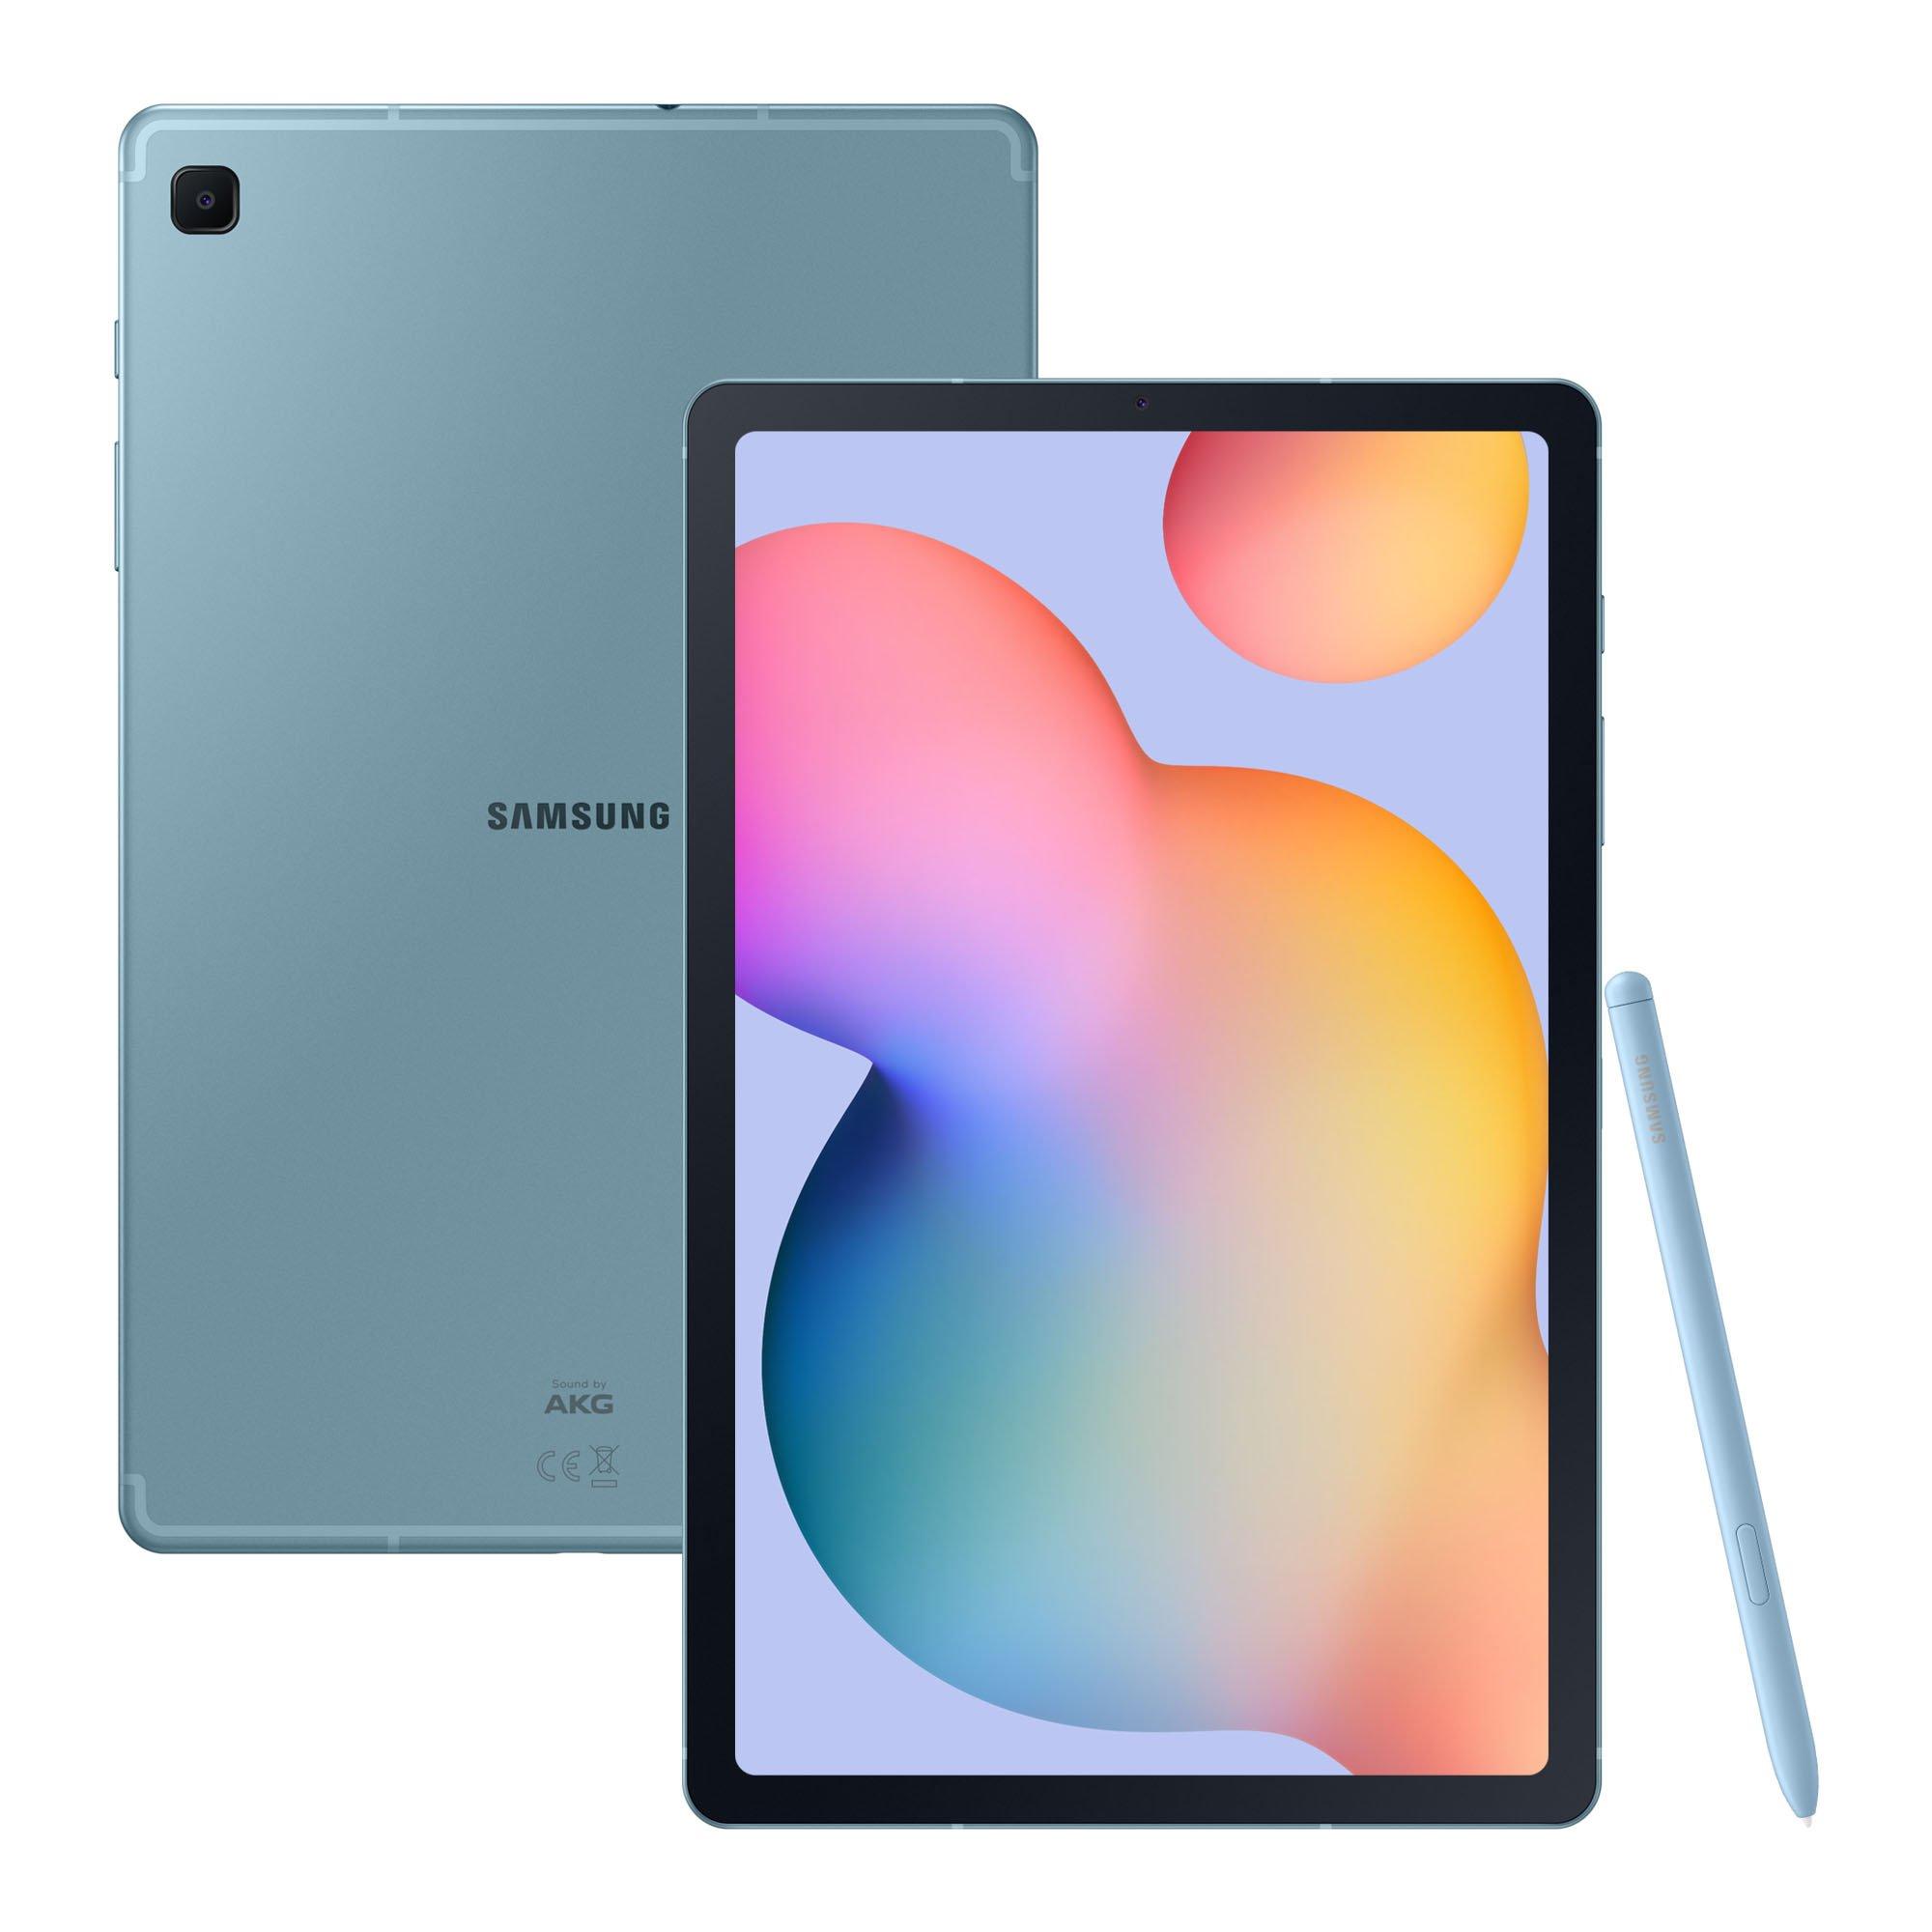 £399, SAMSUNG Galaxy Tab S6 Lite 10.4inch 4G Tablet - 64 GB, Angora Blue, Android 10.0, Full HD screen, 64 GB storage: Perfect for apps / photos / videos / games, Add more storage with a microSD card, Battery life: Up to 12 hours, Dolby Atmos, 